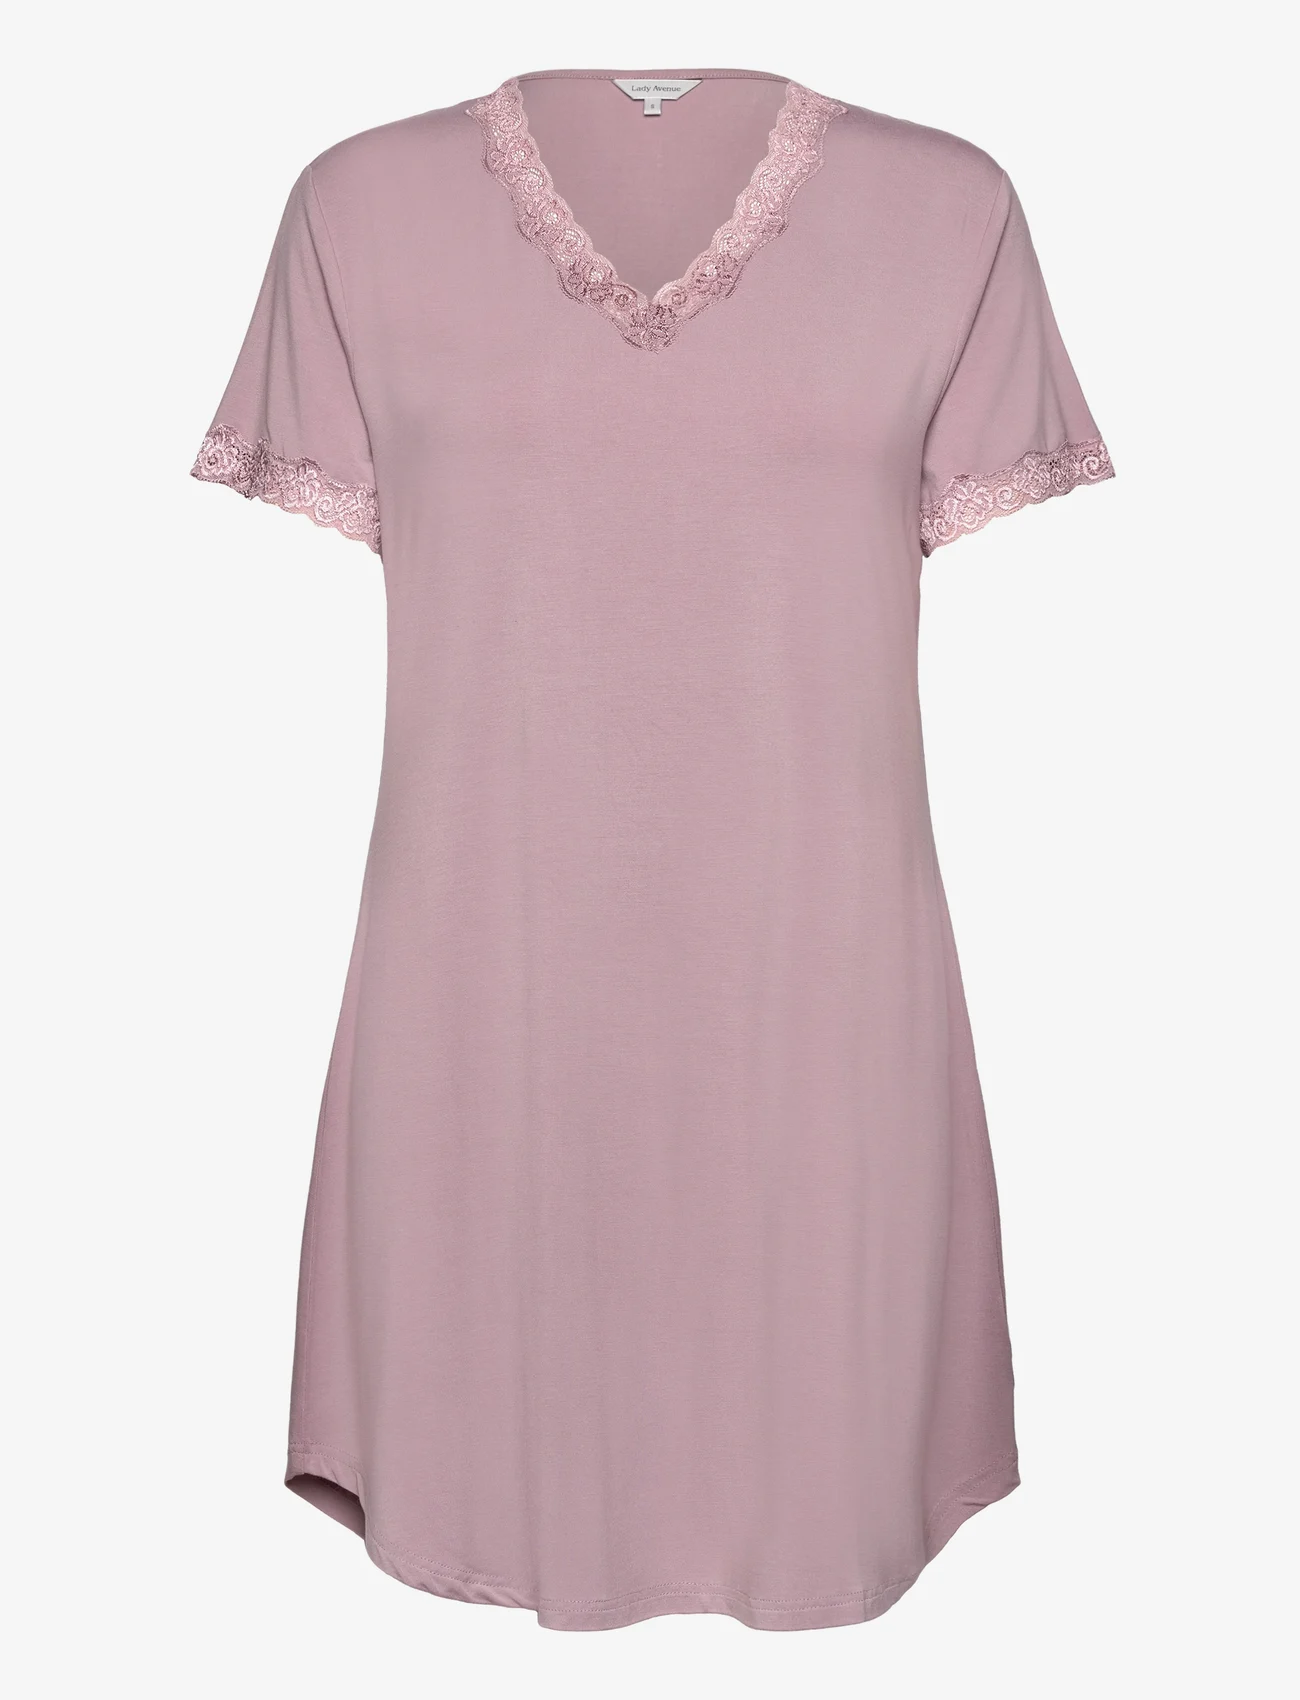 Lady Avenue - Bamboo short sleeve nightdress with - laveste priser - winter rose - 0